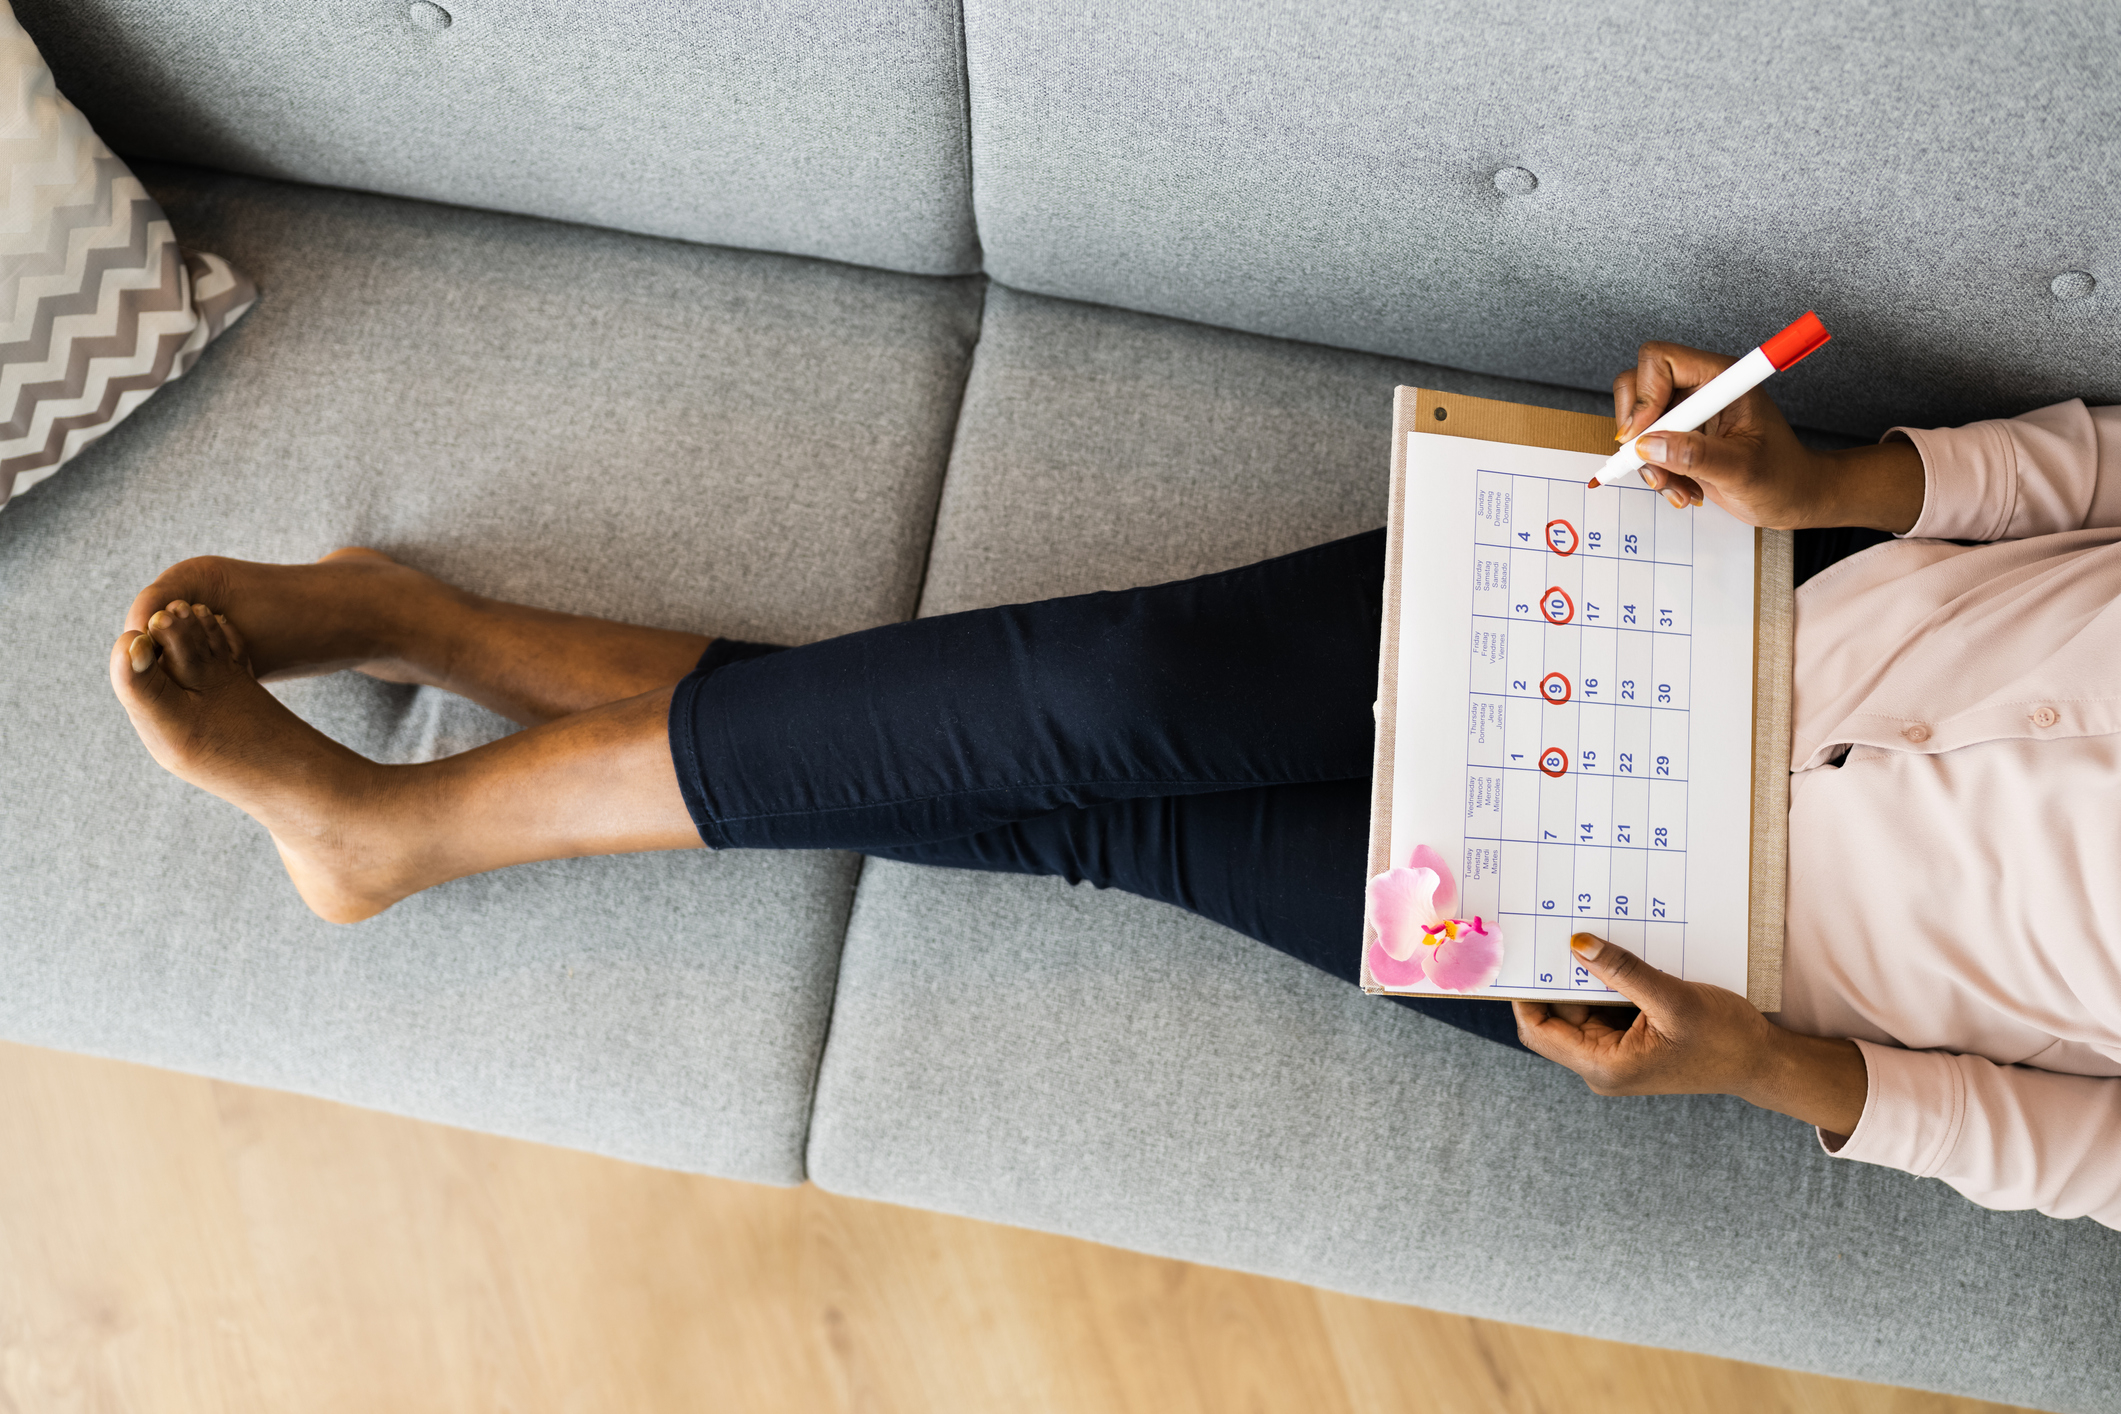 A person tracking their menstrual cycle on a calendar board while sitting on a couch